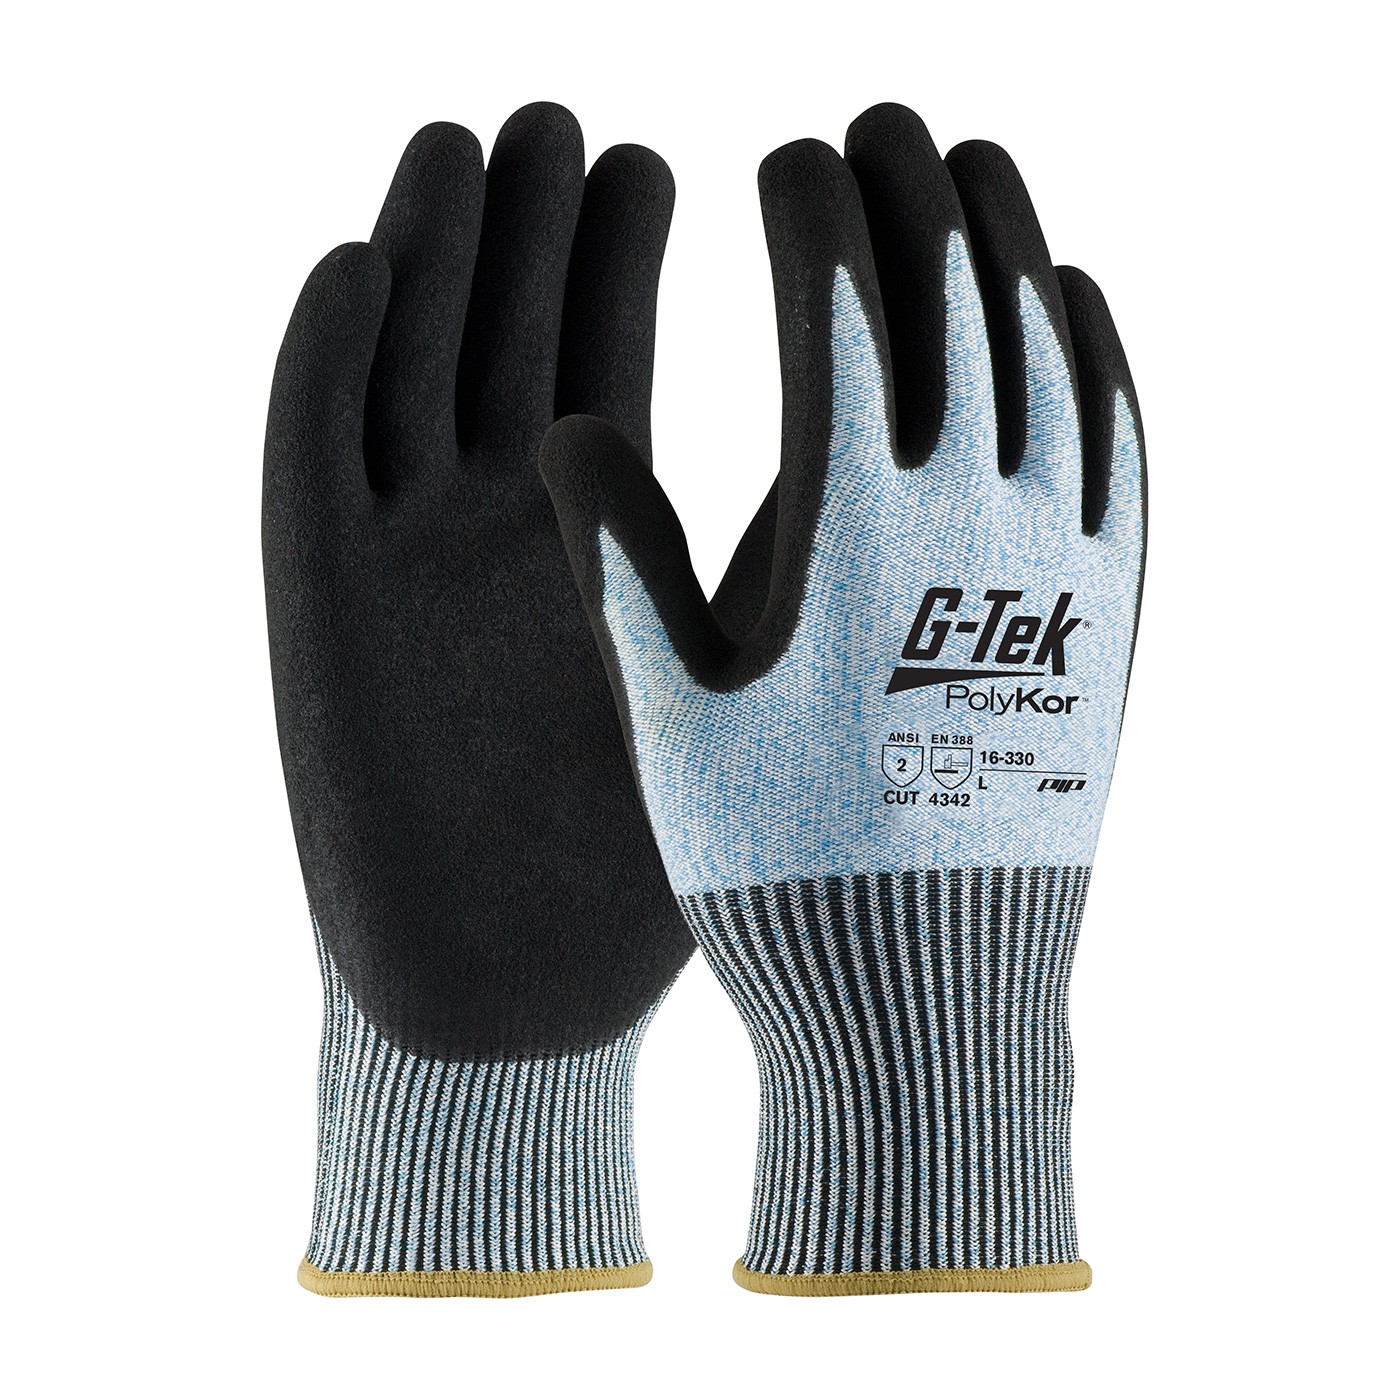 G-Tek® PolyKor® Seamless Knit PolyKor® Blended with Double-Dipped Nitrile Coated MicroSurface Grip on Palm & Fingers  (#16-330)